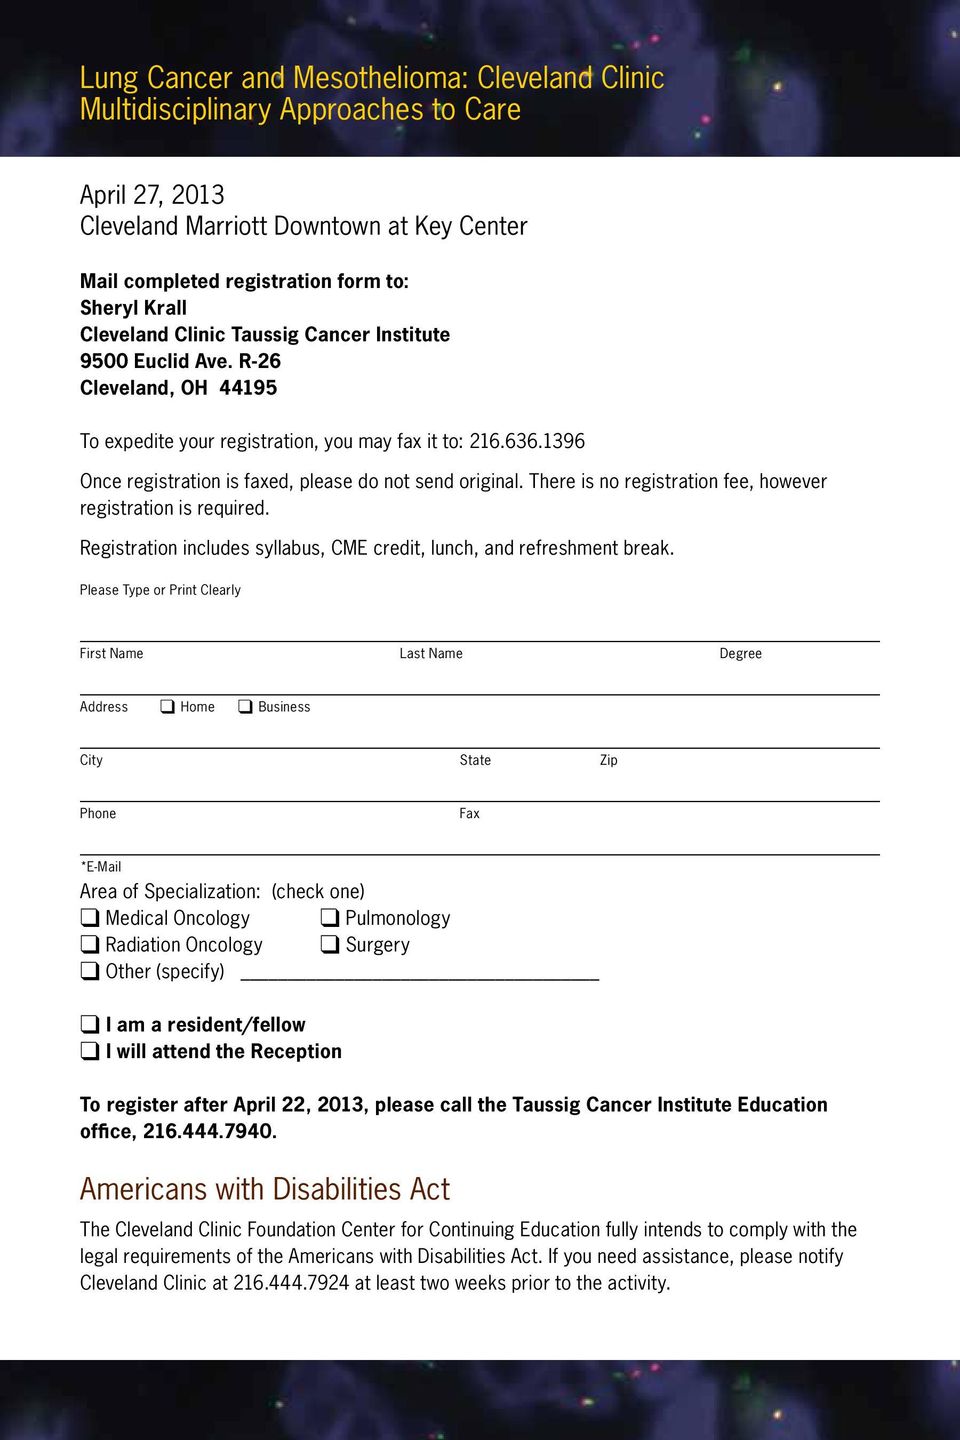 R-26 Cleveland, OH 44195 To expedite your registration, you may fax it to: 216.636.1396 Once registration is faxed, please do not send original.